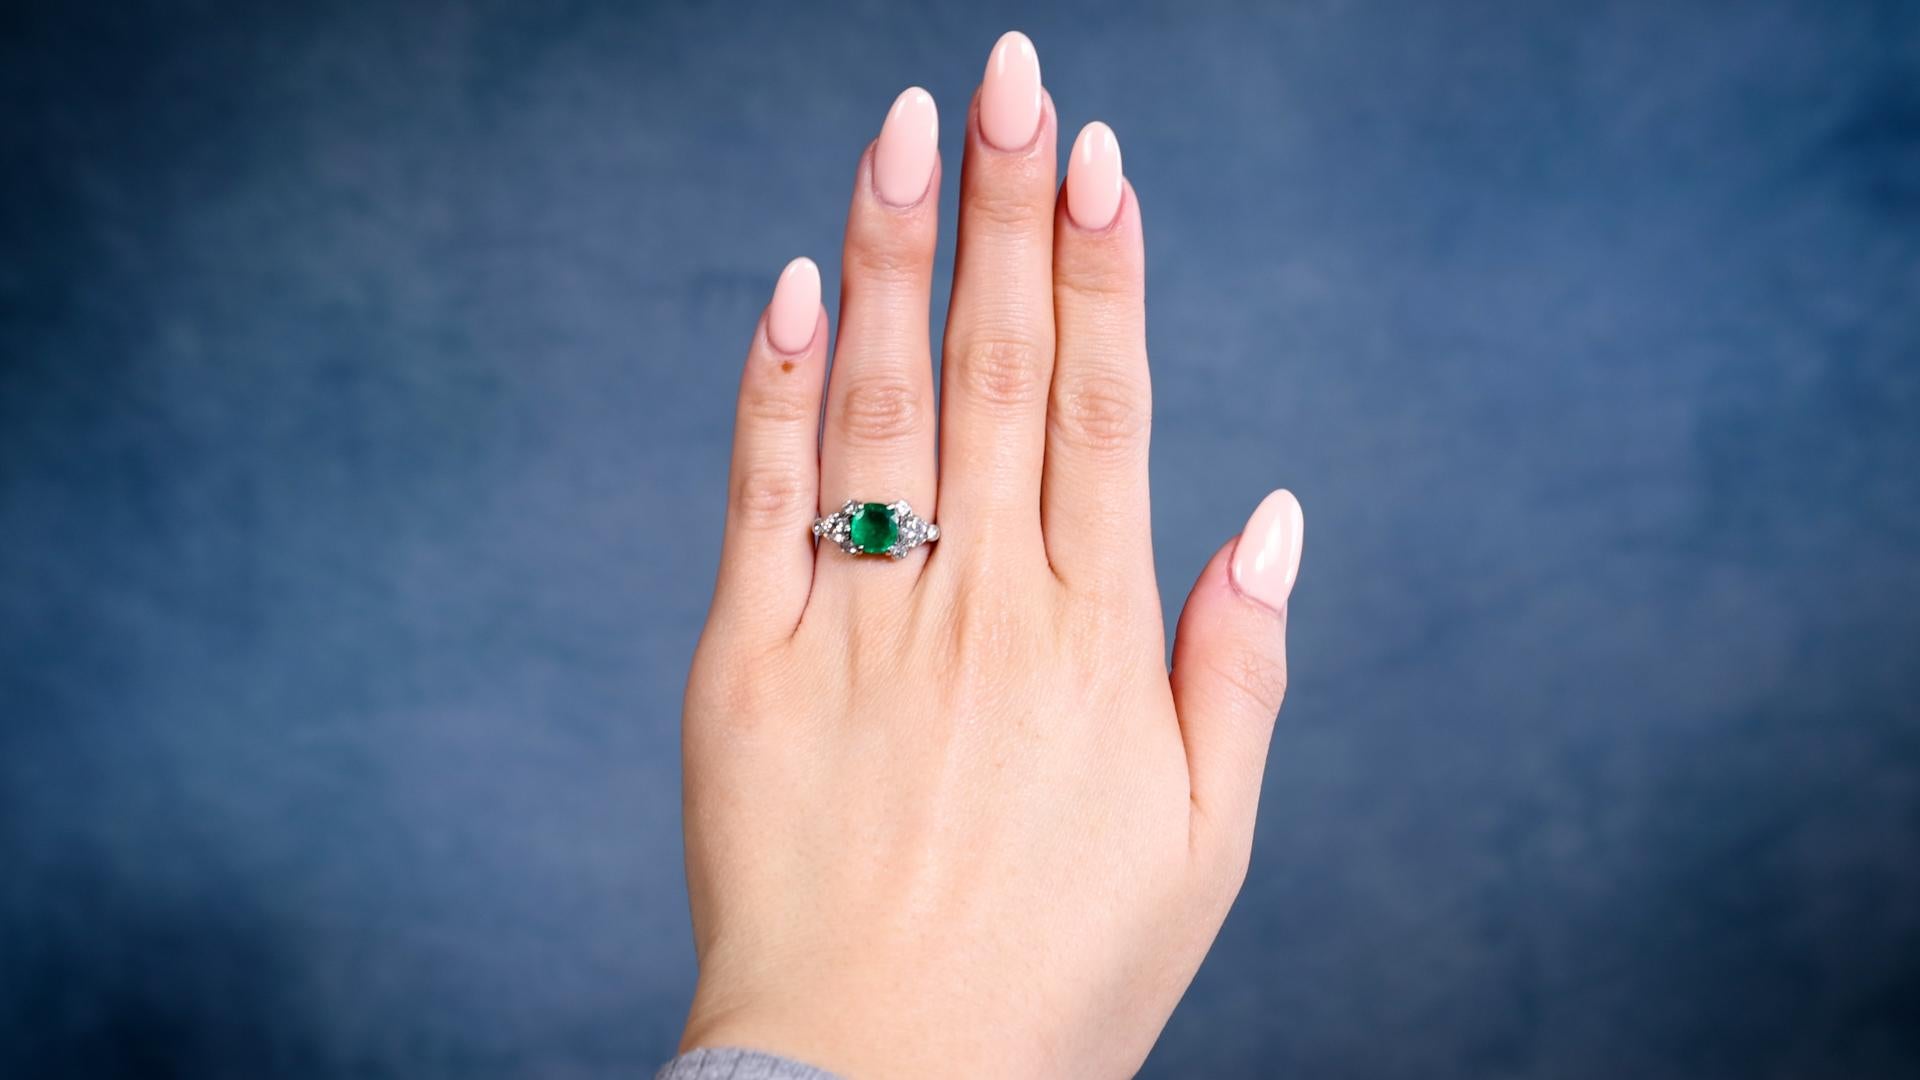 One Art Deco GIA 2.42 Carat Brazilian Emerald and Diamond Silver Ring. Featuring one GIA cushion mixed cut emerald weighing 2.42 carats, accompanied by GIA #2235177985 stating the emerald is of Brazilian origin. Accented by eight single and old